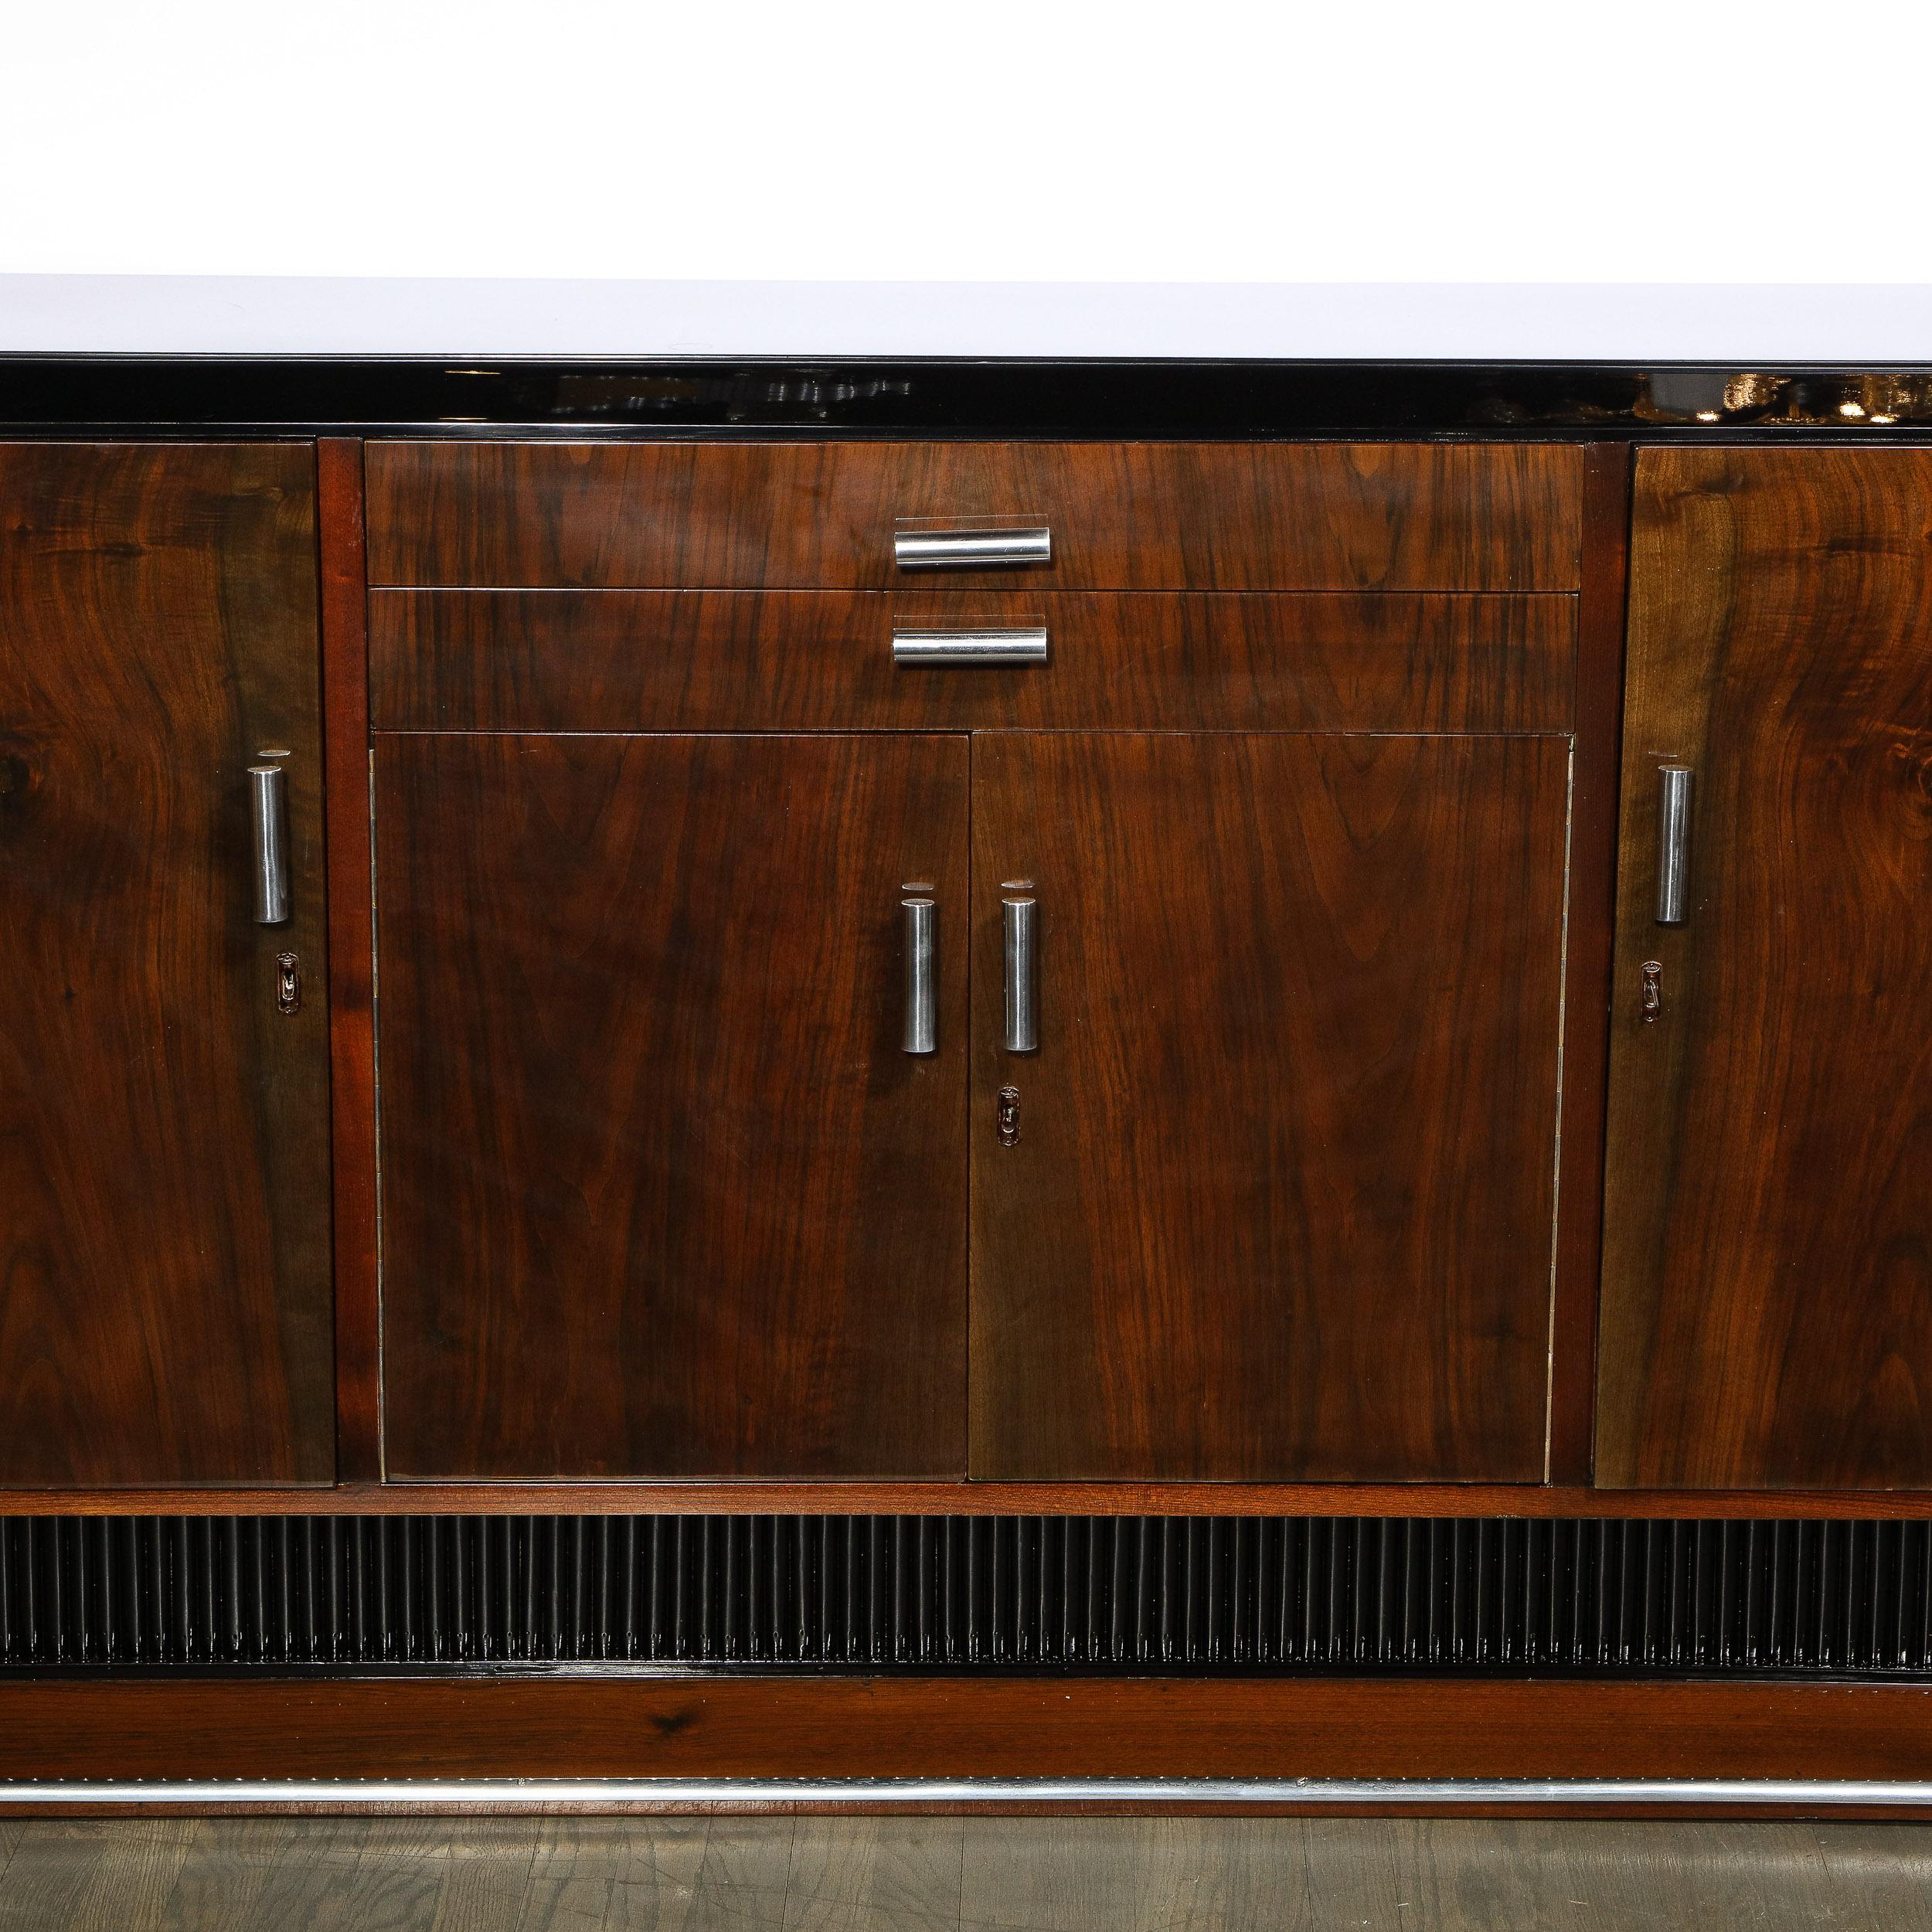 This stunning Art Deco Machine Age skyscraper style sideboard was realized in the United States circa 1935. It features a beveled bookmatched walnut base with an aluminum wrapped perimeter that ascends into a reeded art Deco tier that supports the